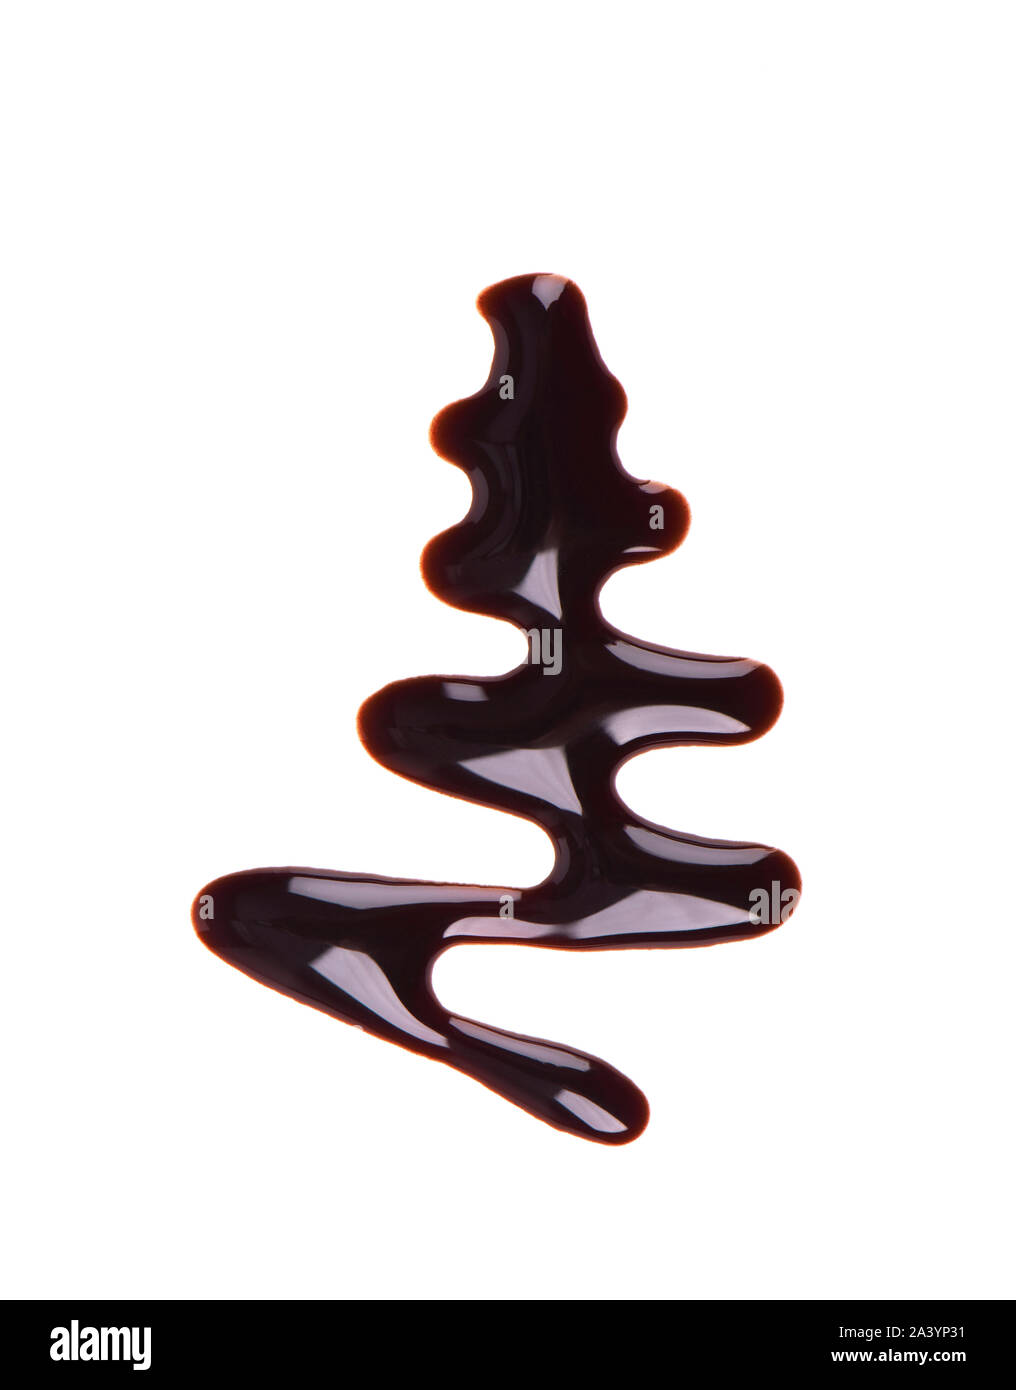 Chocolate syrup drop isolated on white background. Top view. Stock Photo